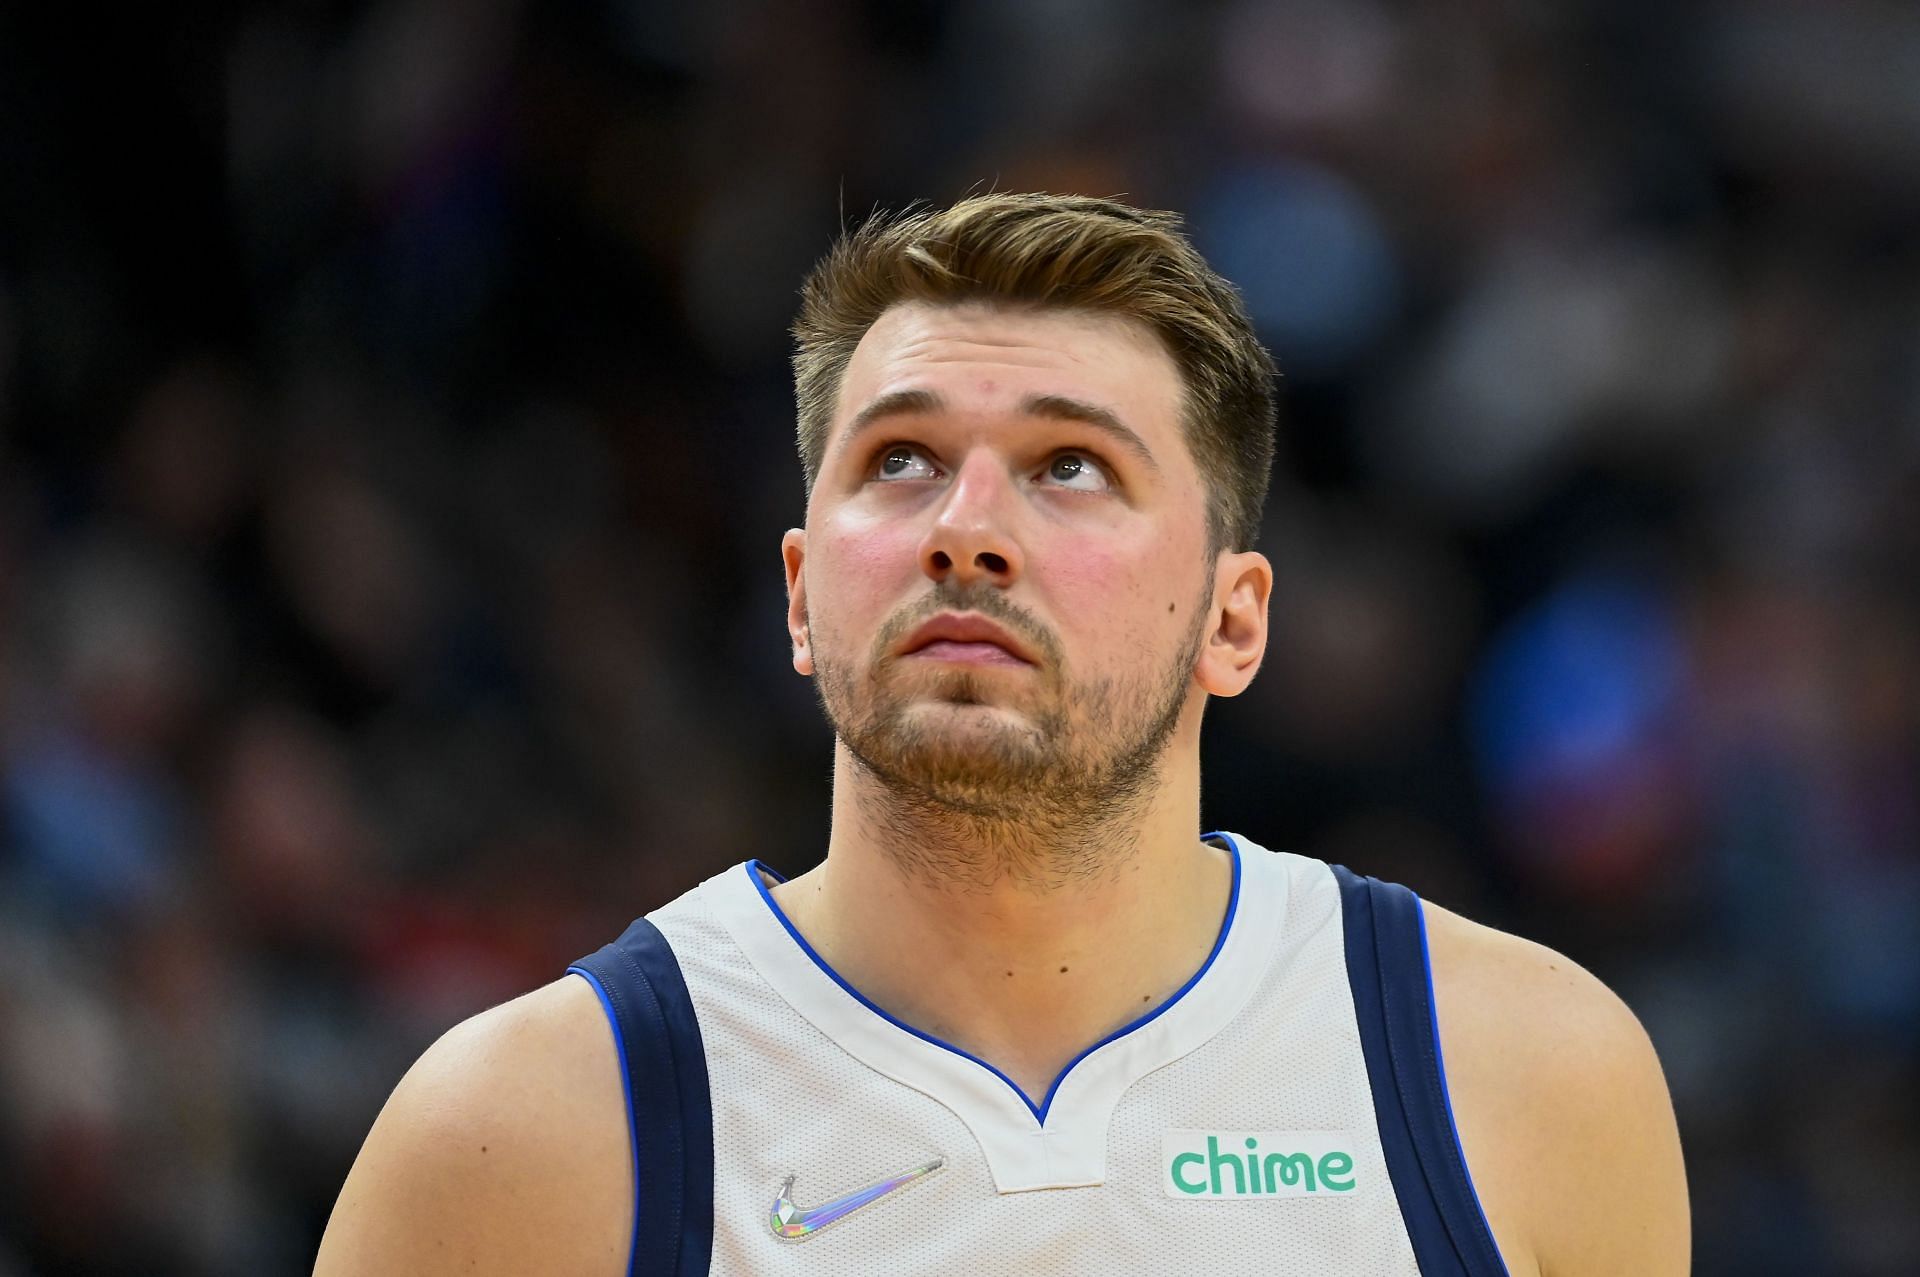 Luka Doncic of the Mavericks in the first round of the 2022 NBA playoffs against the Utah Jazz